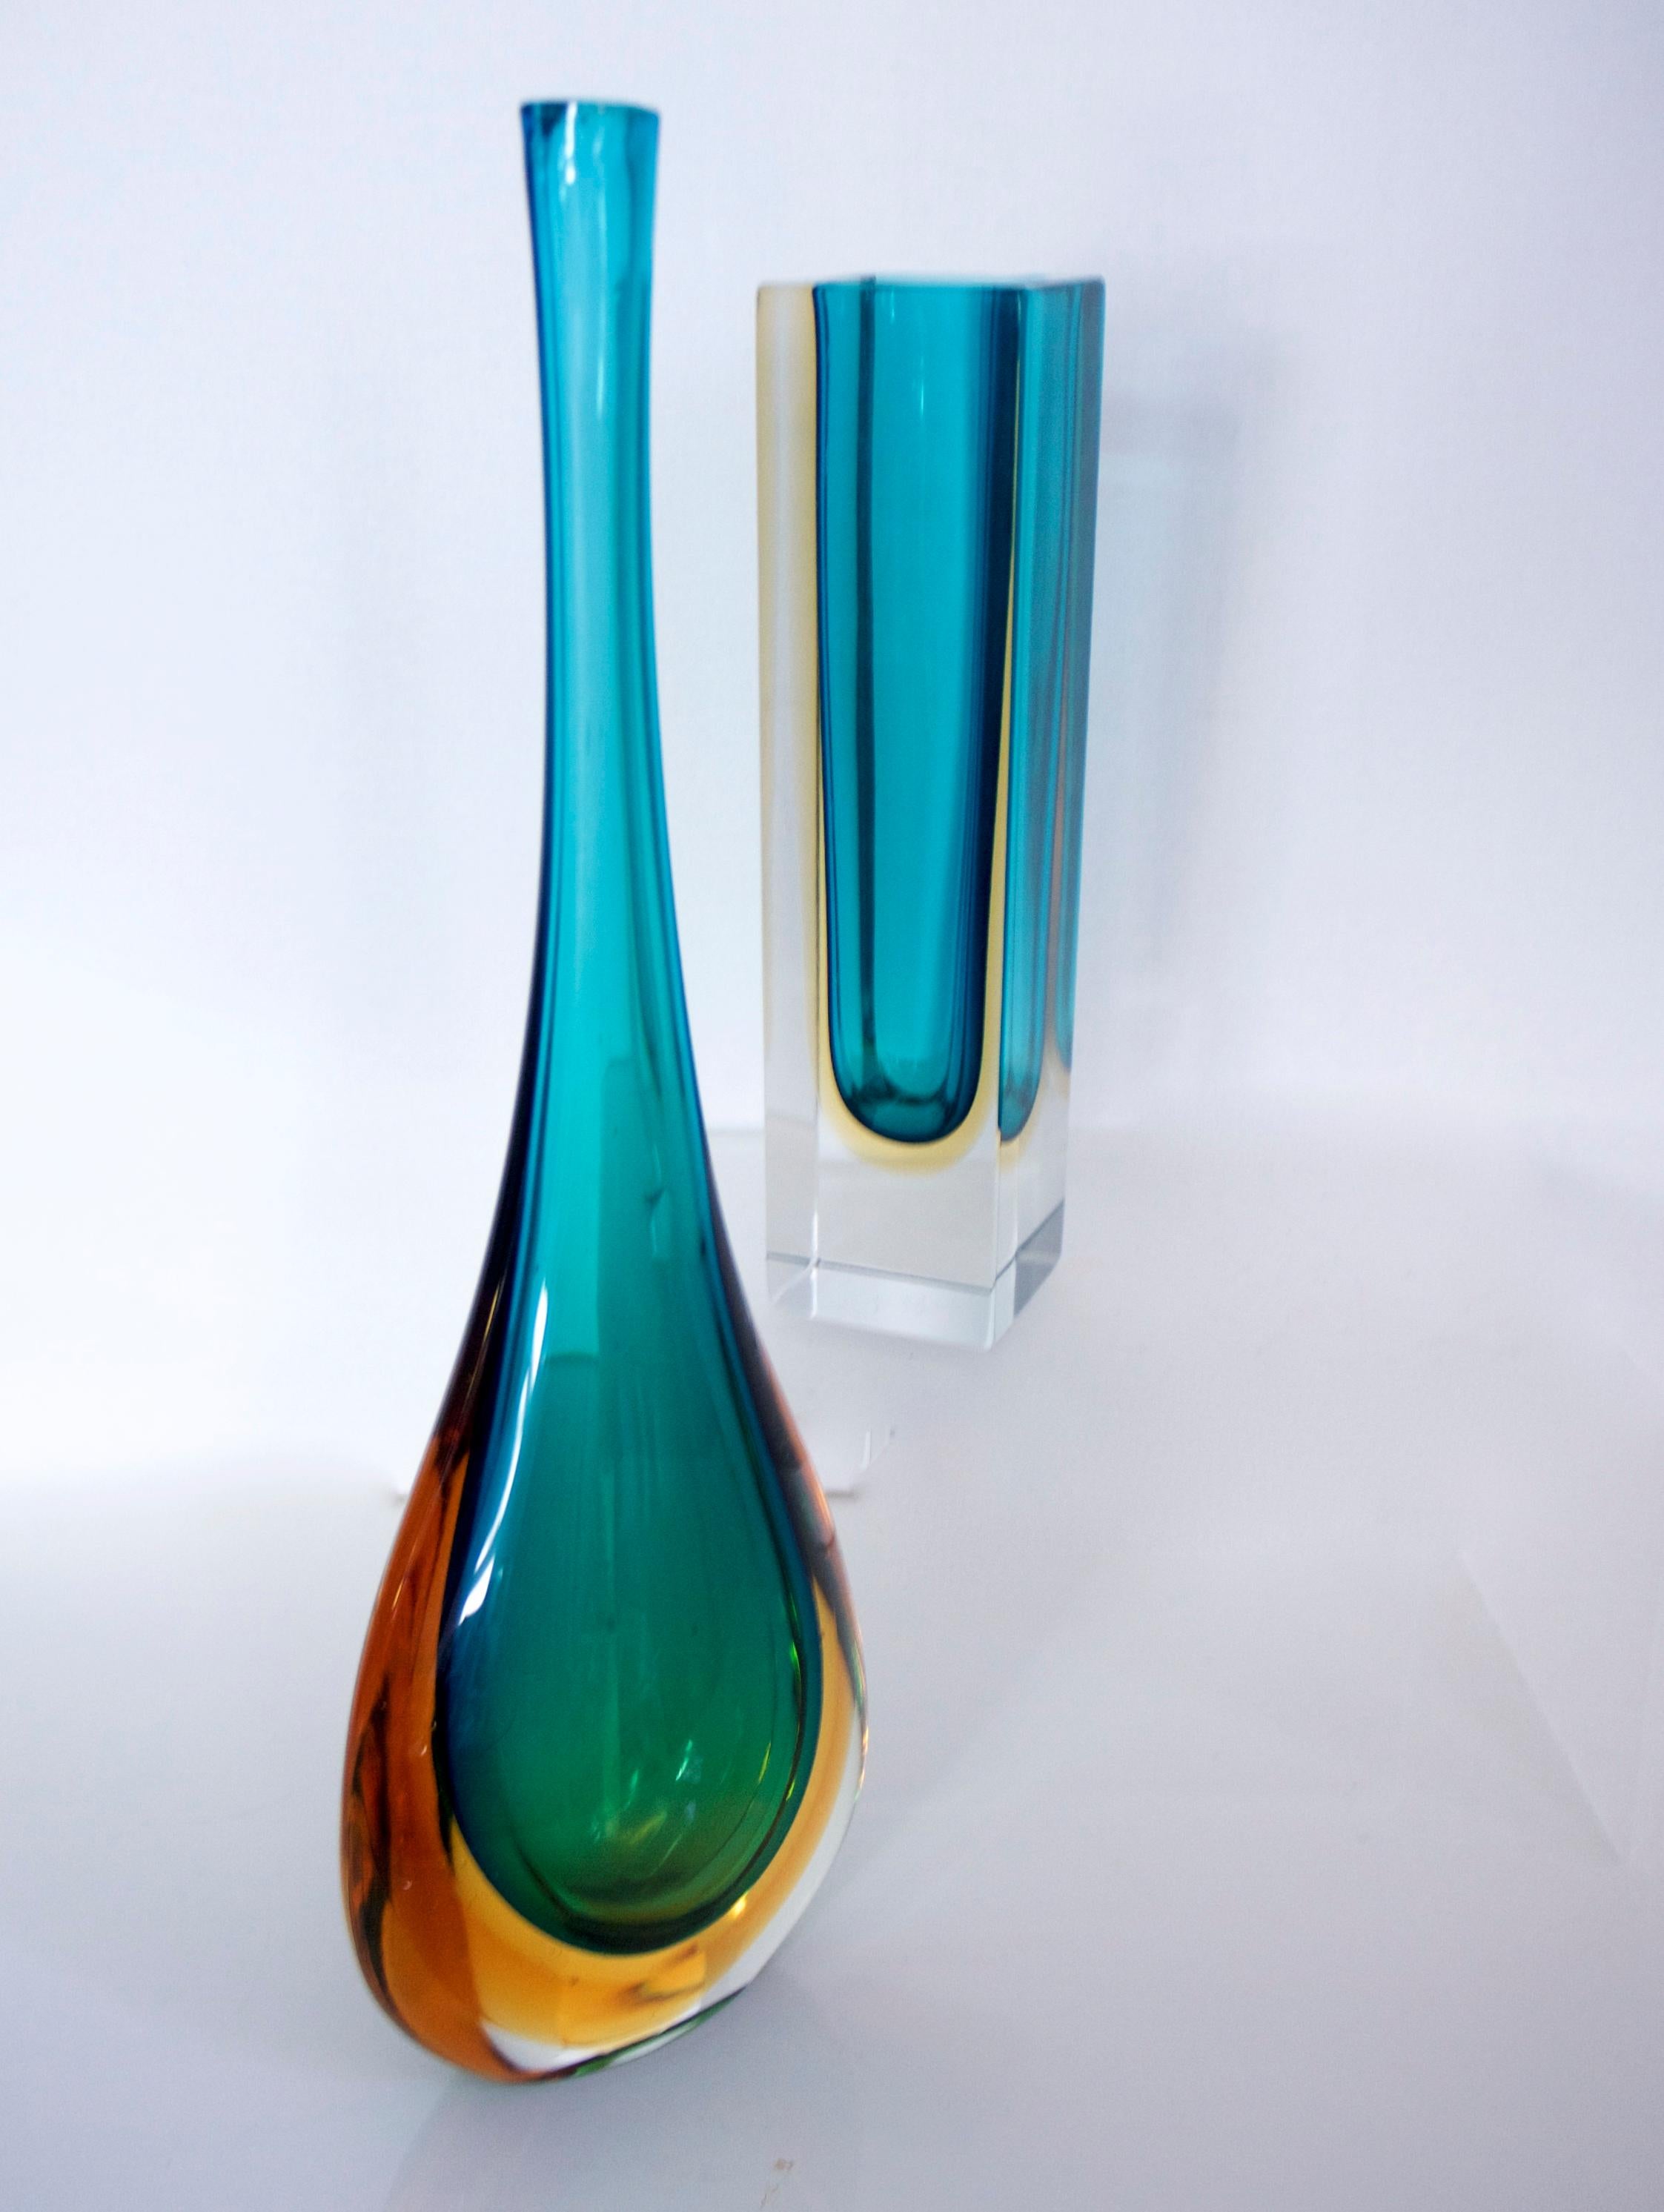 Murano Sommerso tear drop and Mandruzzato pillar vase, jade green and yellow circa 1968- Flavio Poli

Large Teardrop
Measures: Height 32 cms
Width at widest 11 cms
Weight 1.048 kgs
Mandruzzato was founded in 1956 on the island of Murano,